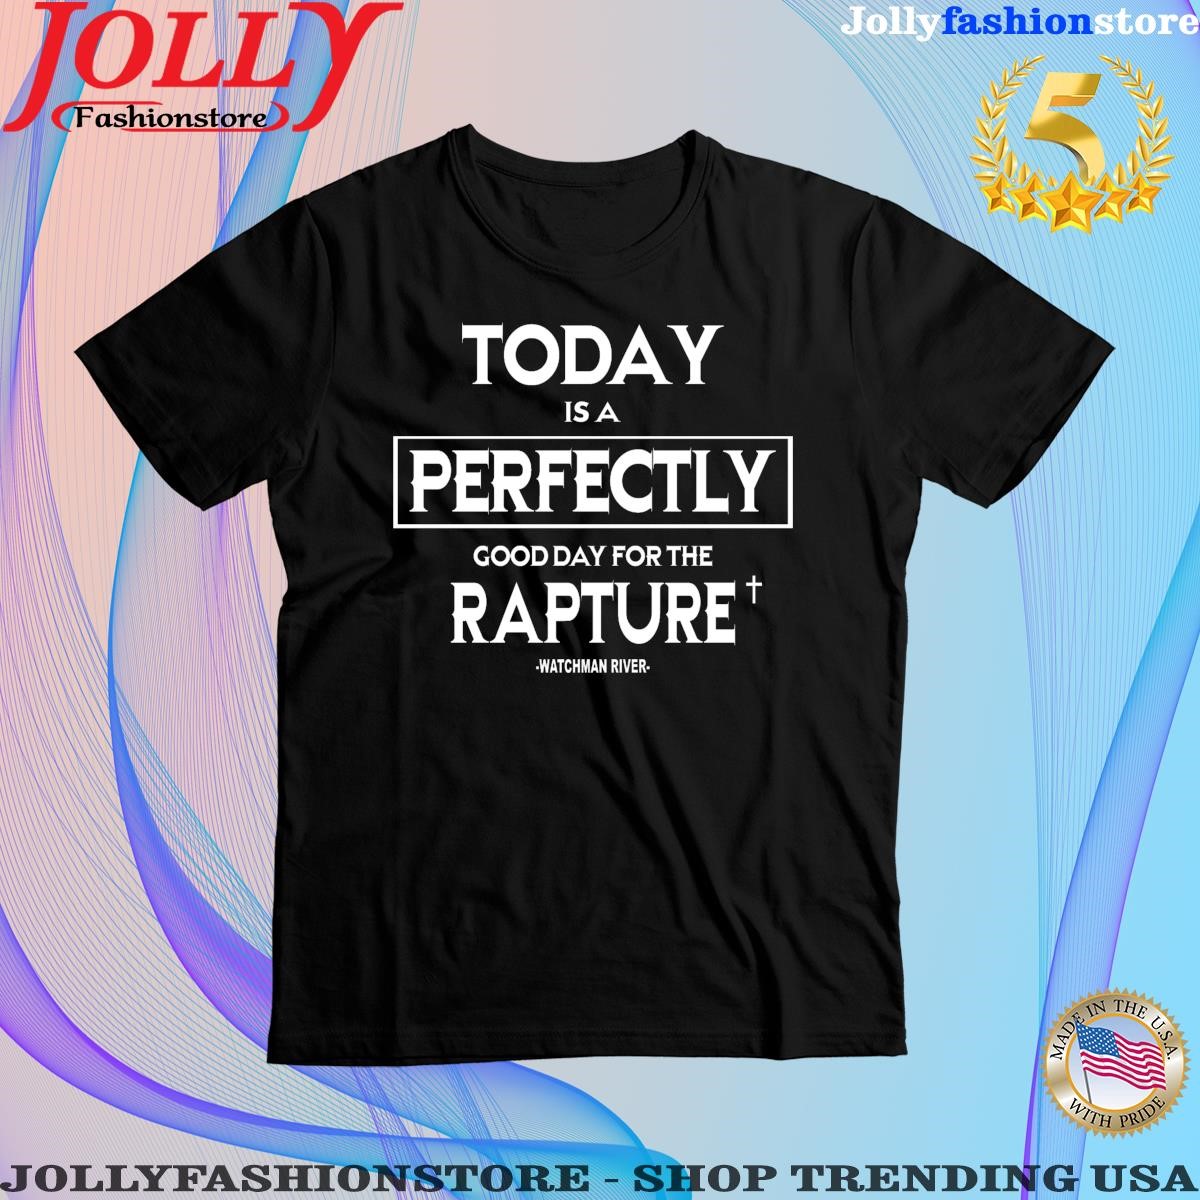 Trending watchman river today is a perfectly good day for the rapture Shirt